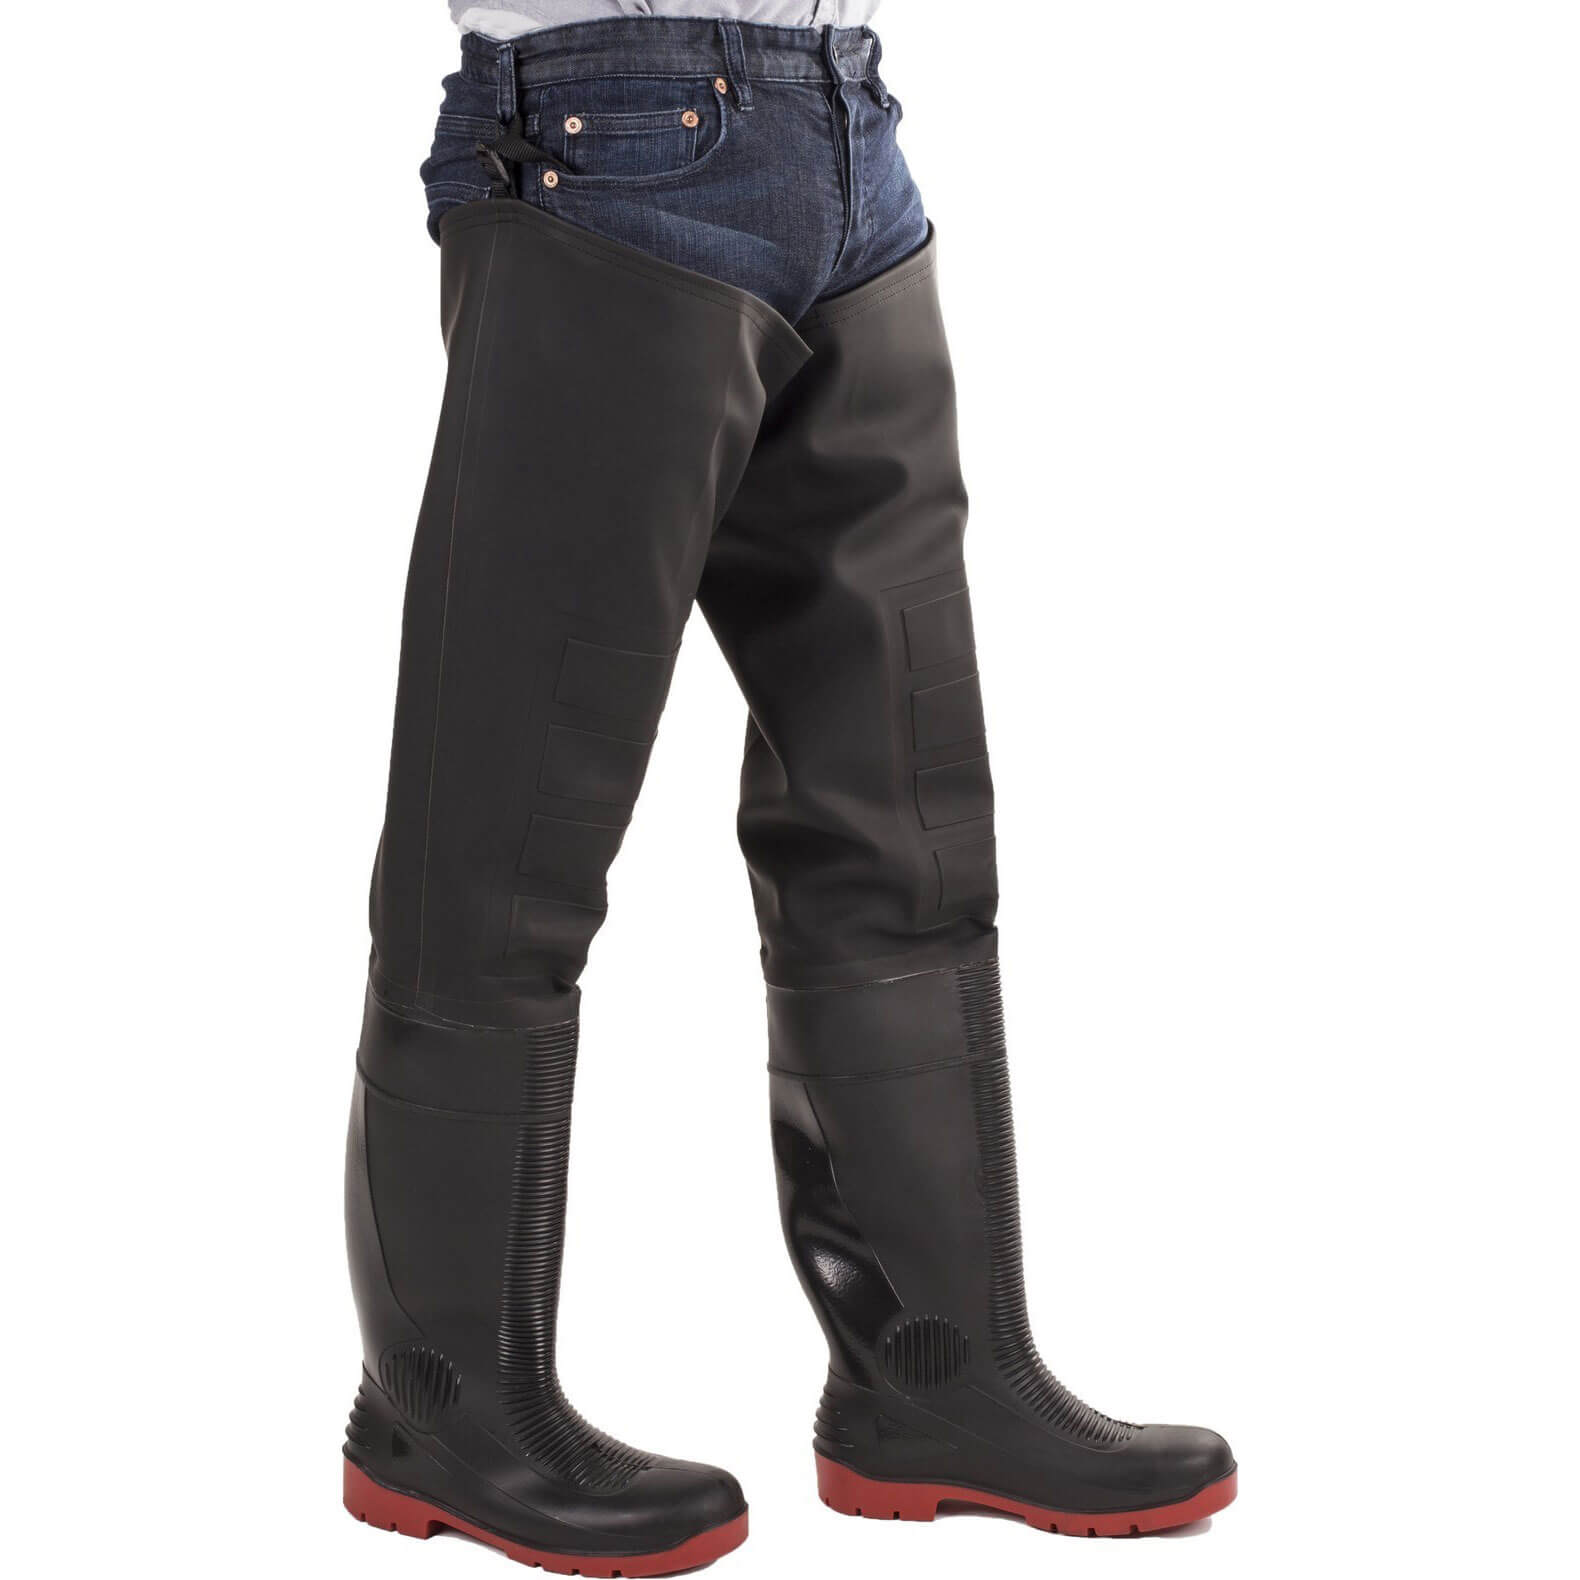 Image of Amblers Safety Rhone Thigh Safety Wader Black / Red Size 4